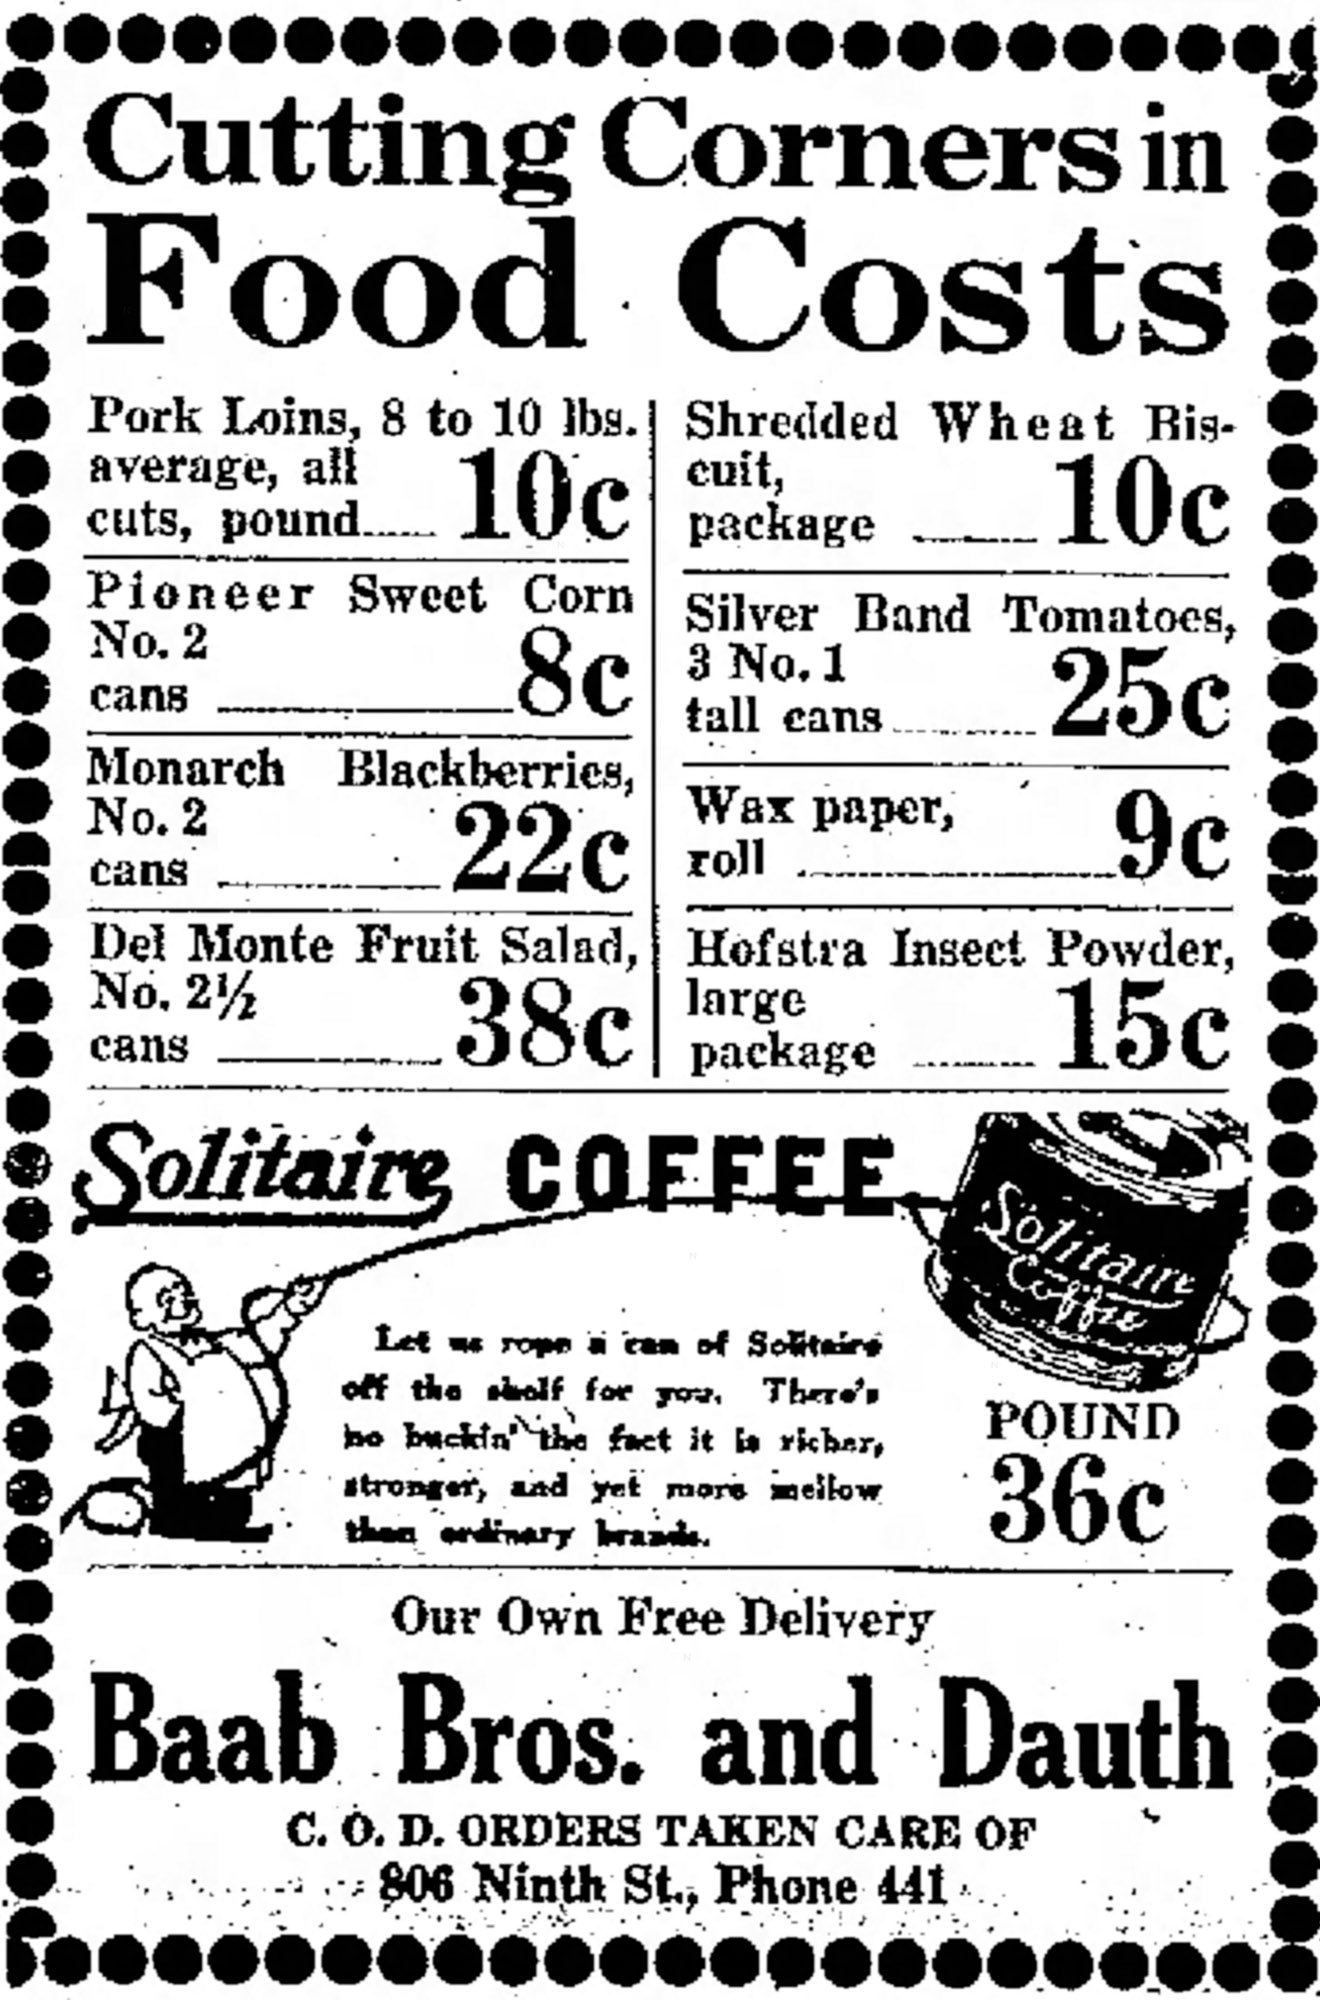 Dauth Family Archive - 1932-05-26 - Greeley Daily Tribune - Baab Bros and Dauth Advertisement